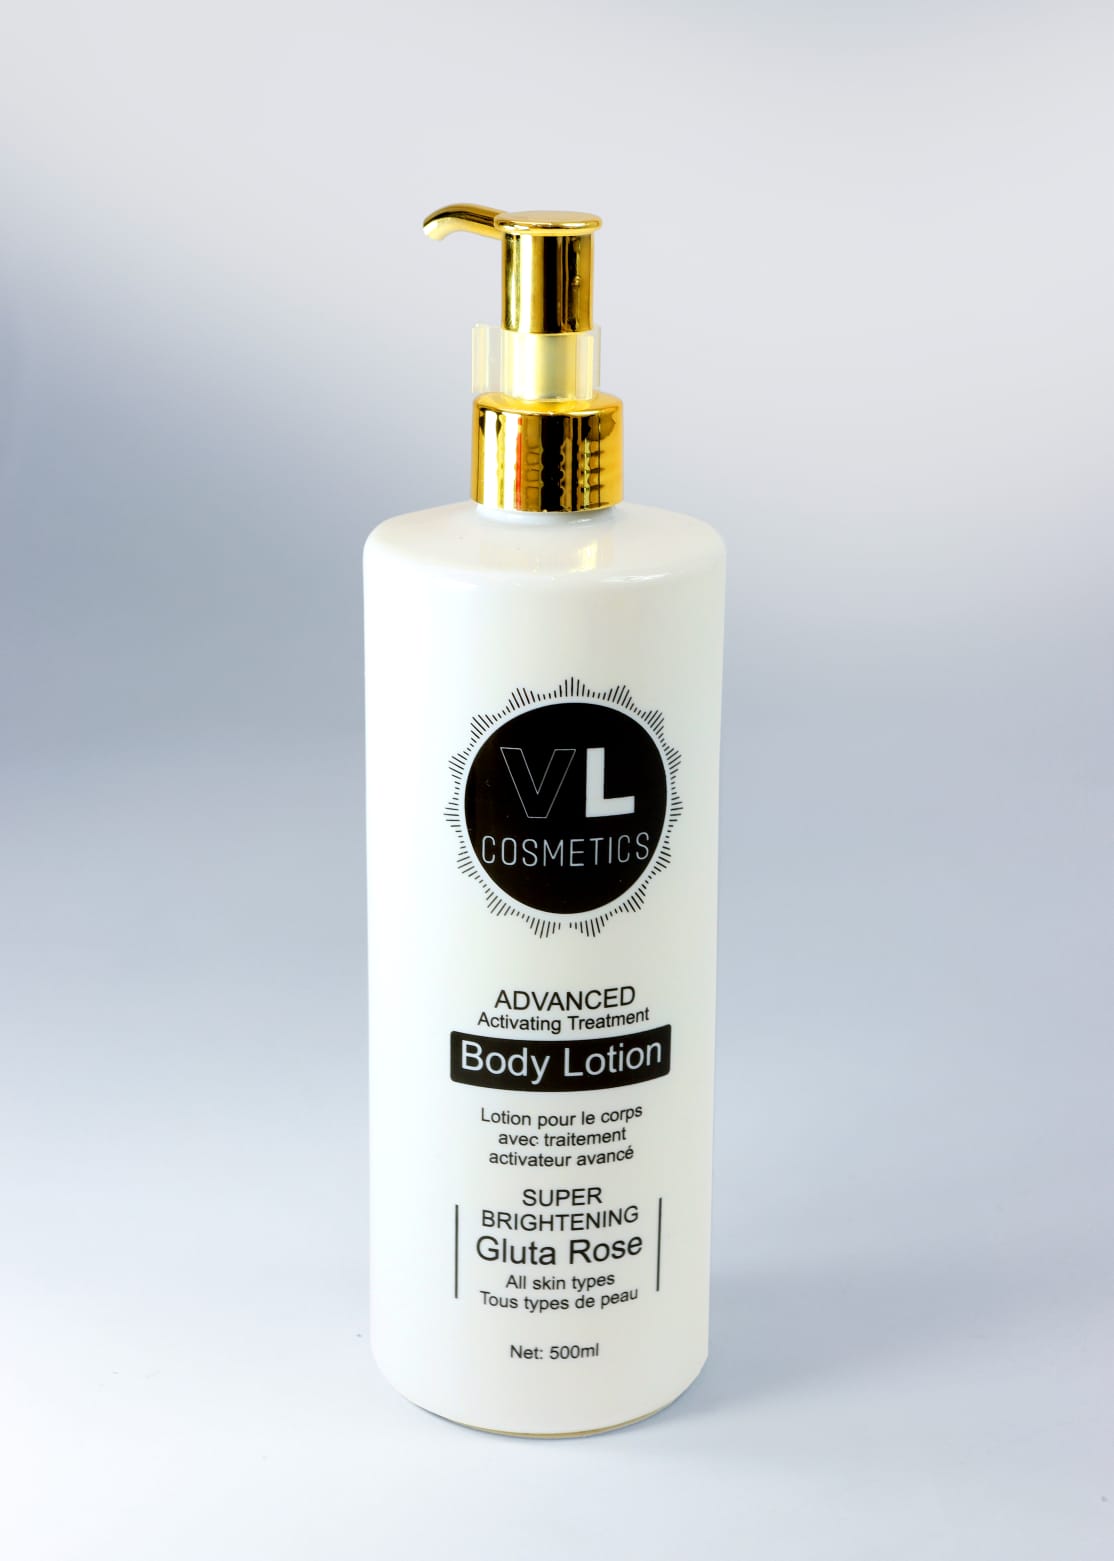 Advanced Activating Treatment Body Lotion 500ml